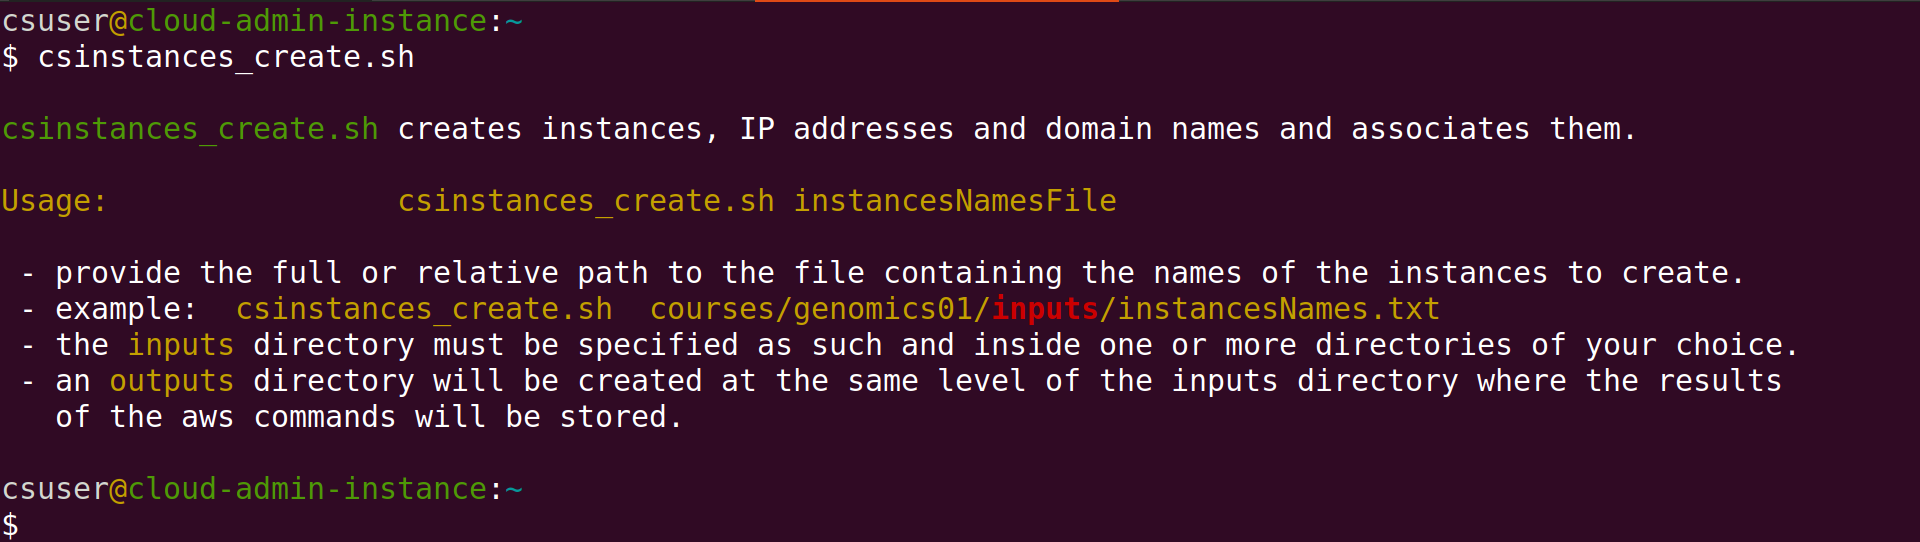 Screenshot of Linux terminal with the name of the script "csinstances_create.sh" circled